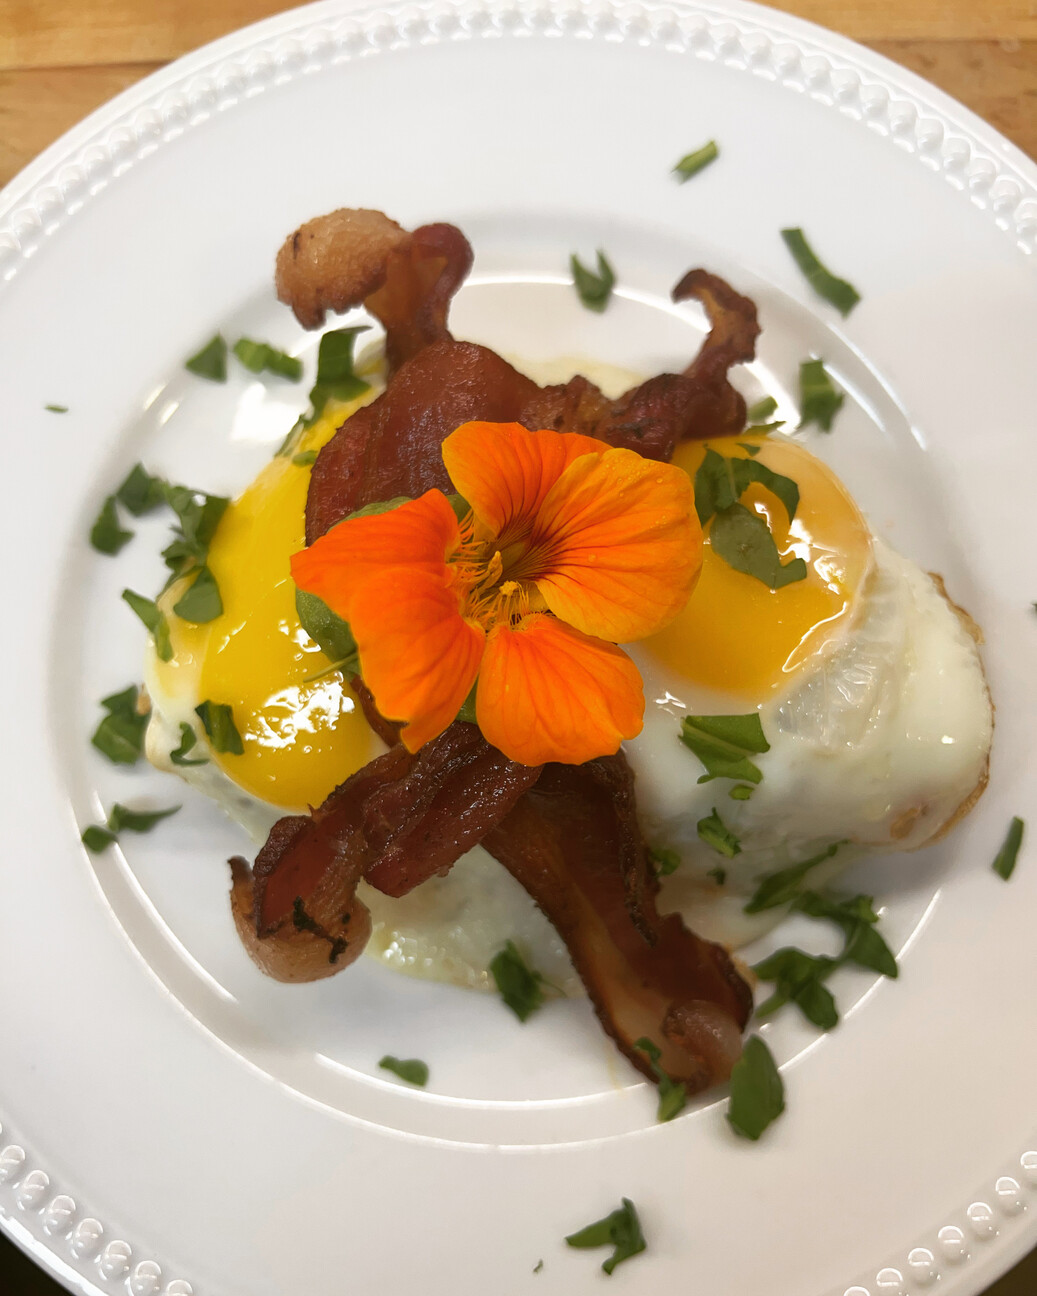 gormet breakfast with eggs and bacon and a flower garnish